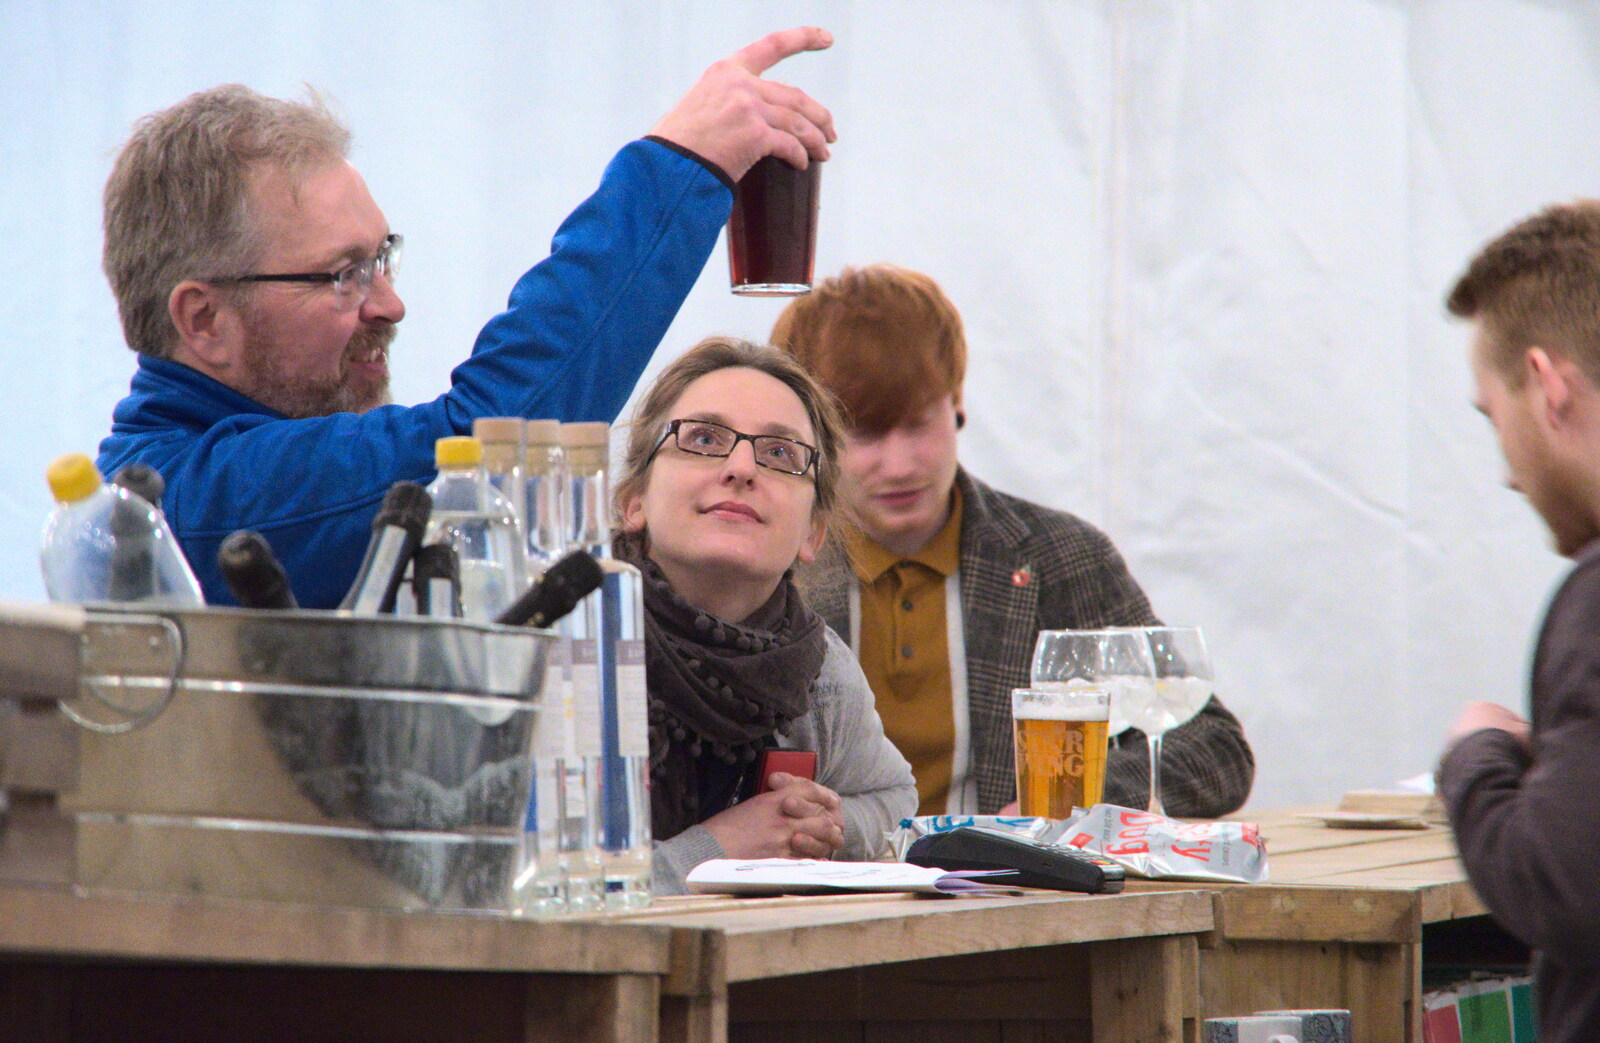 Marc checks his pint from The Star Wing Winter Beer Fest, Redgrave, Suffolk - 31st January 2020